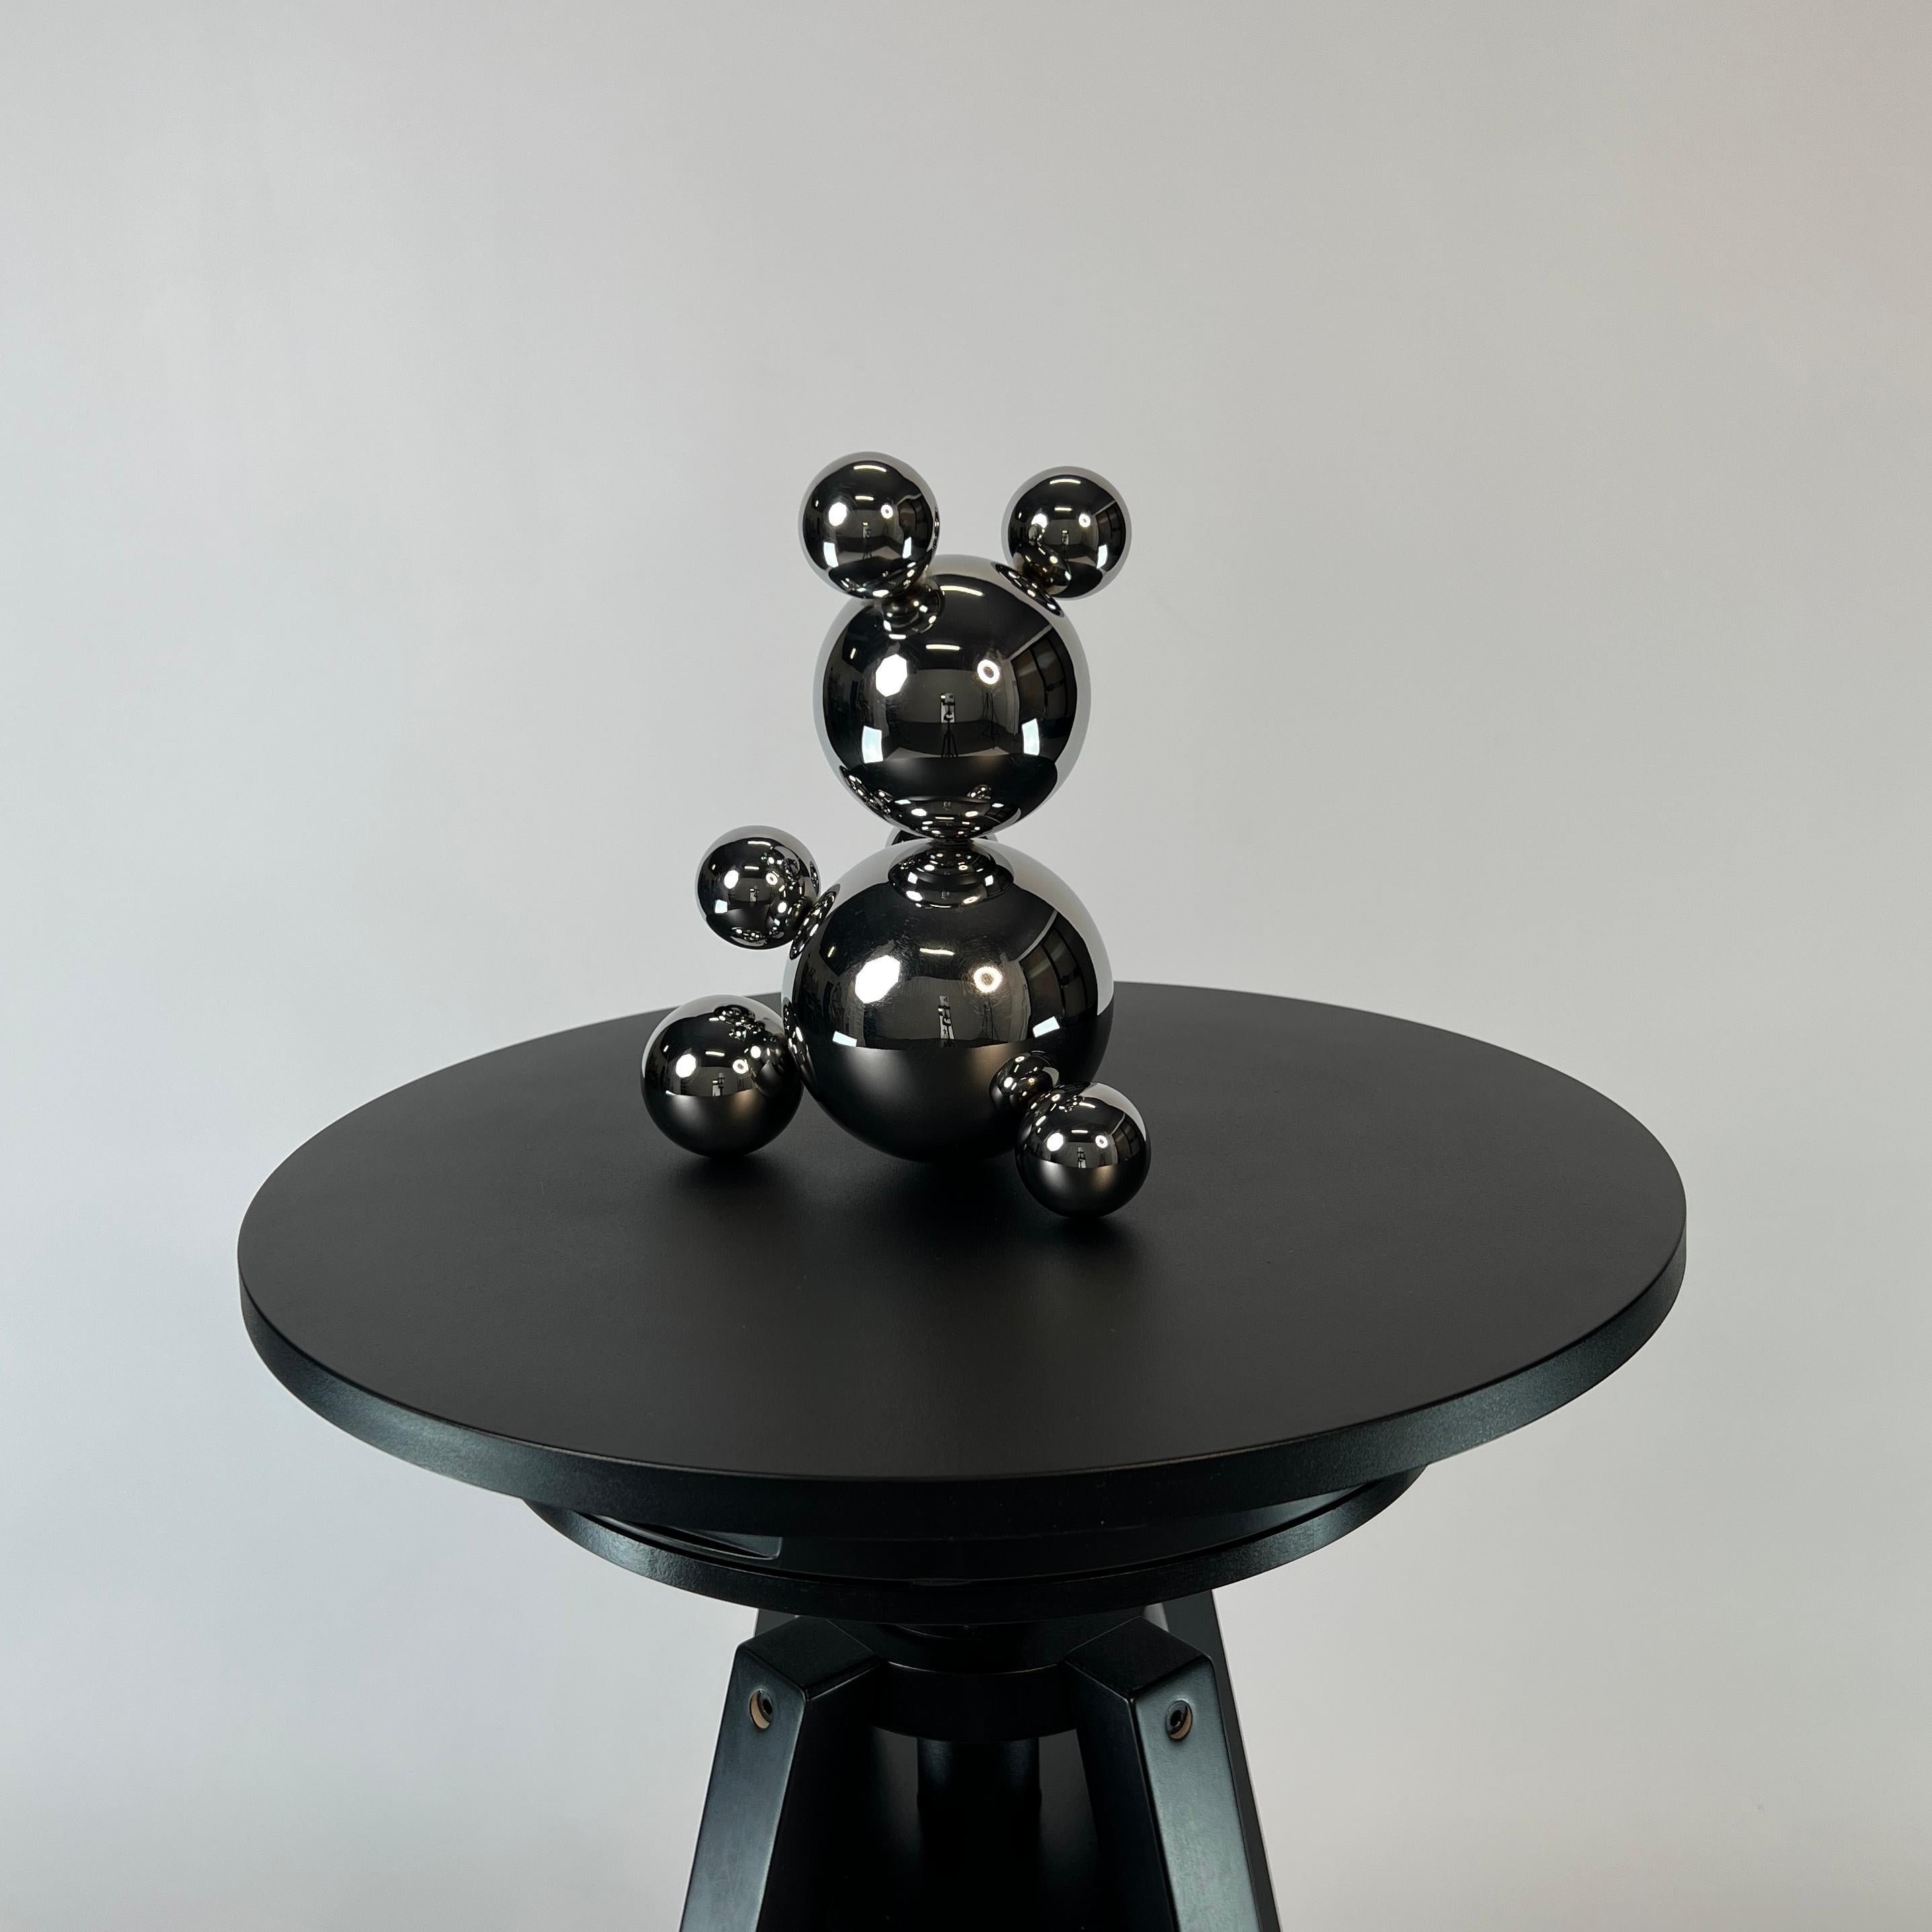 Made in Spain, 2024.
A simple form builds a complex one. In our approach, we go from the opposite, representing complex things in simple forms. So, our bear consists of only 9 simple steel balls, but this minimalism does not stop making him a bear.